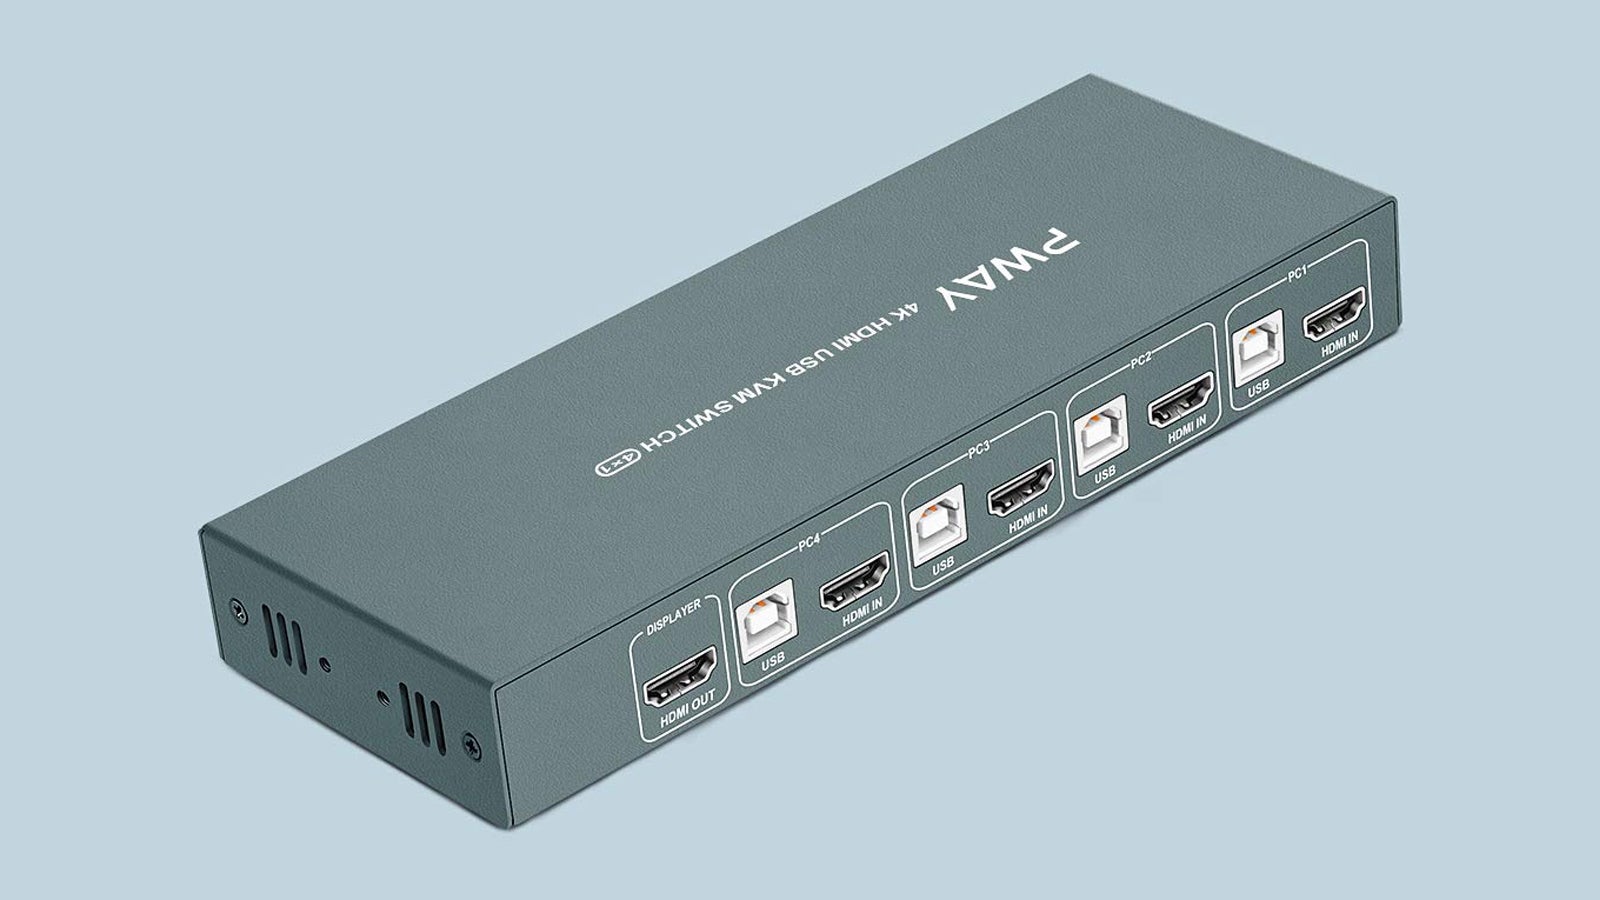 A KVM switch is the traditional approach. (Image: Greathtek/Amazon)